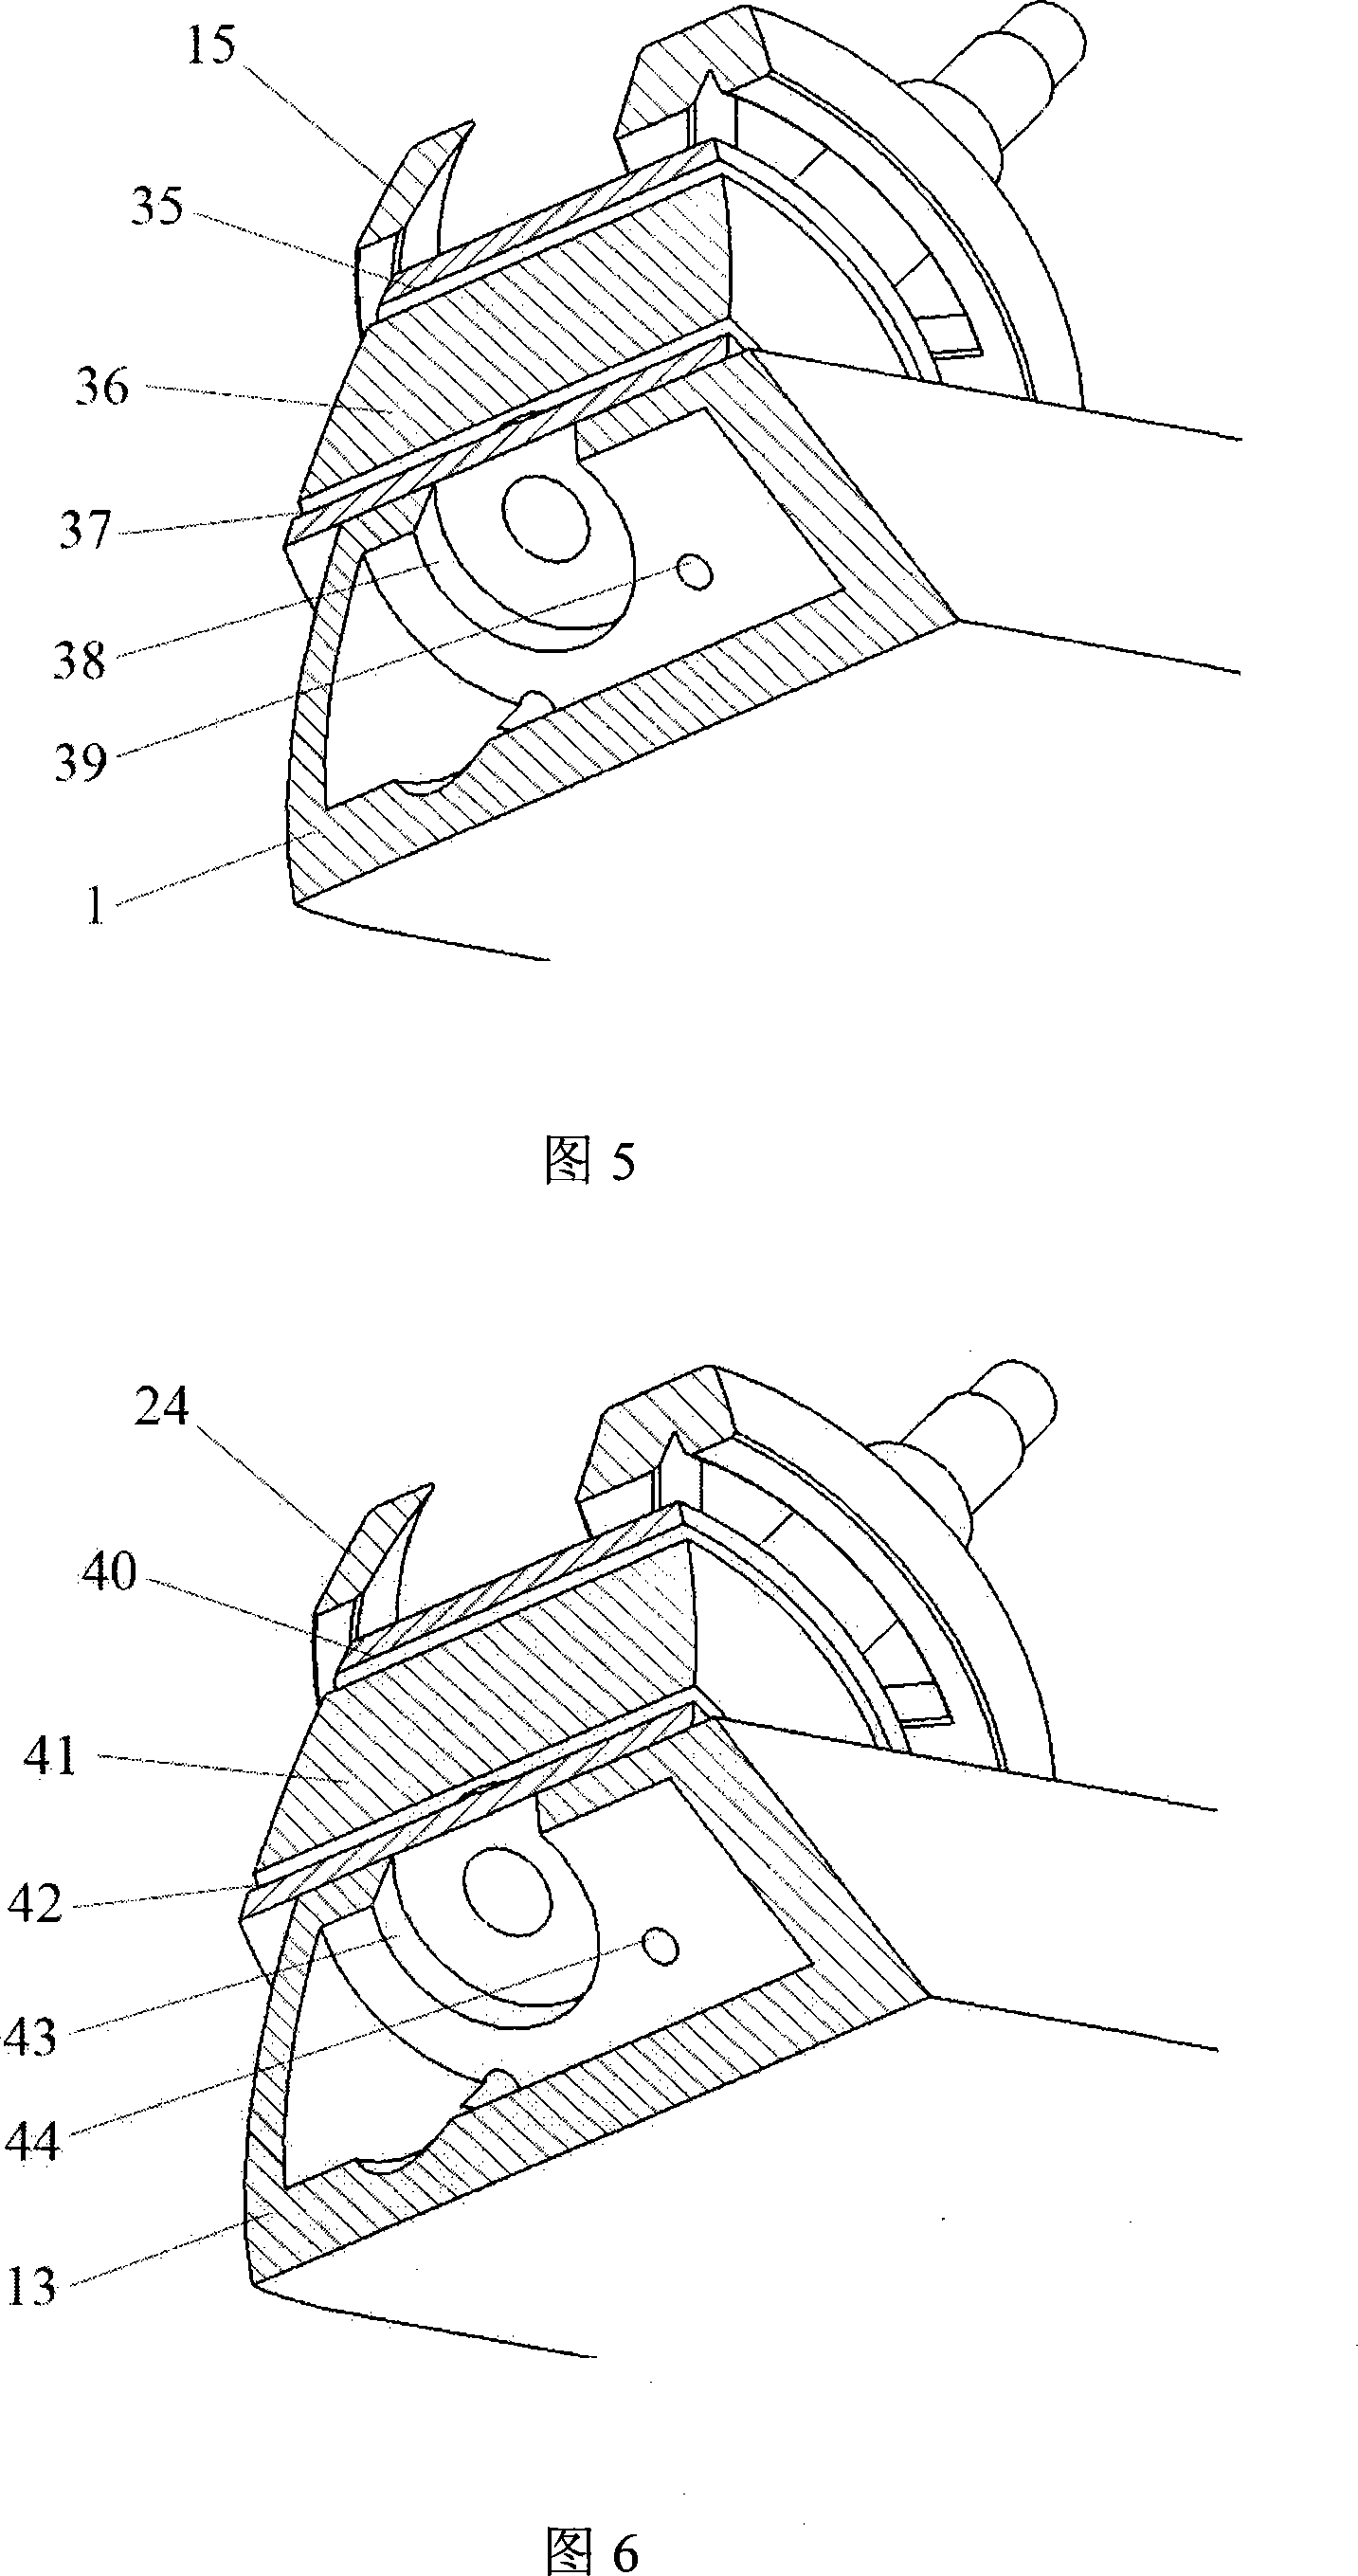 Dual-purpose robot leg with wheel and foot